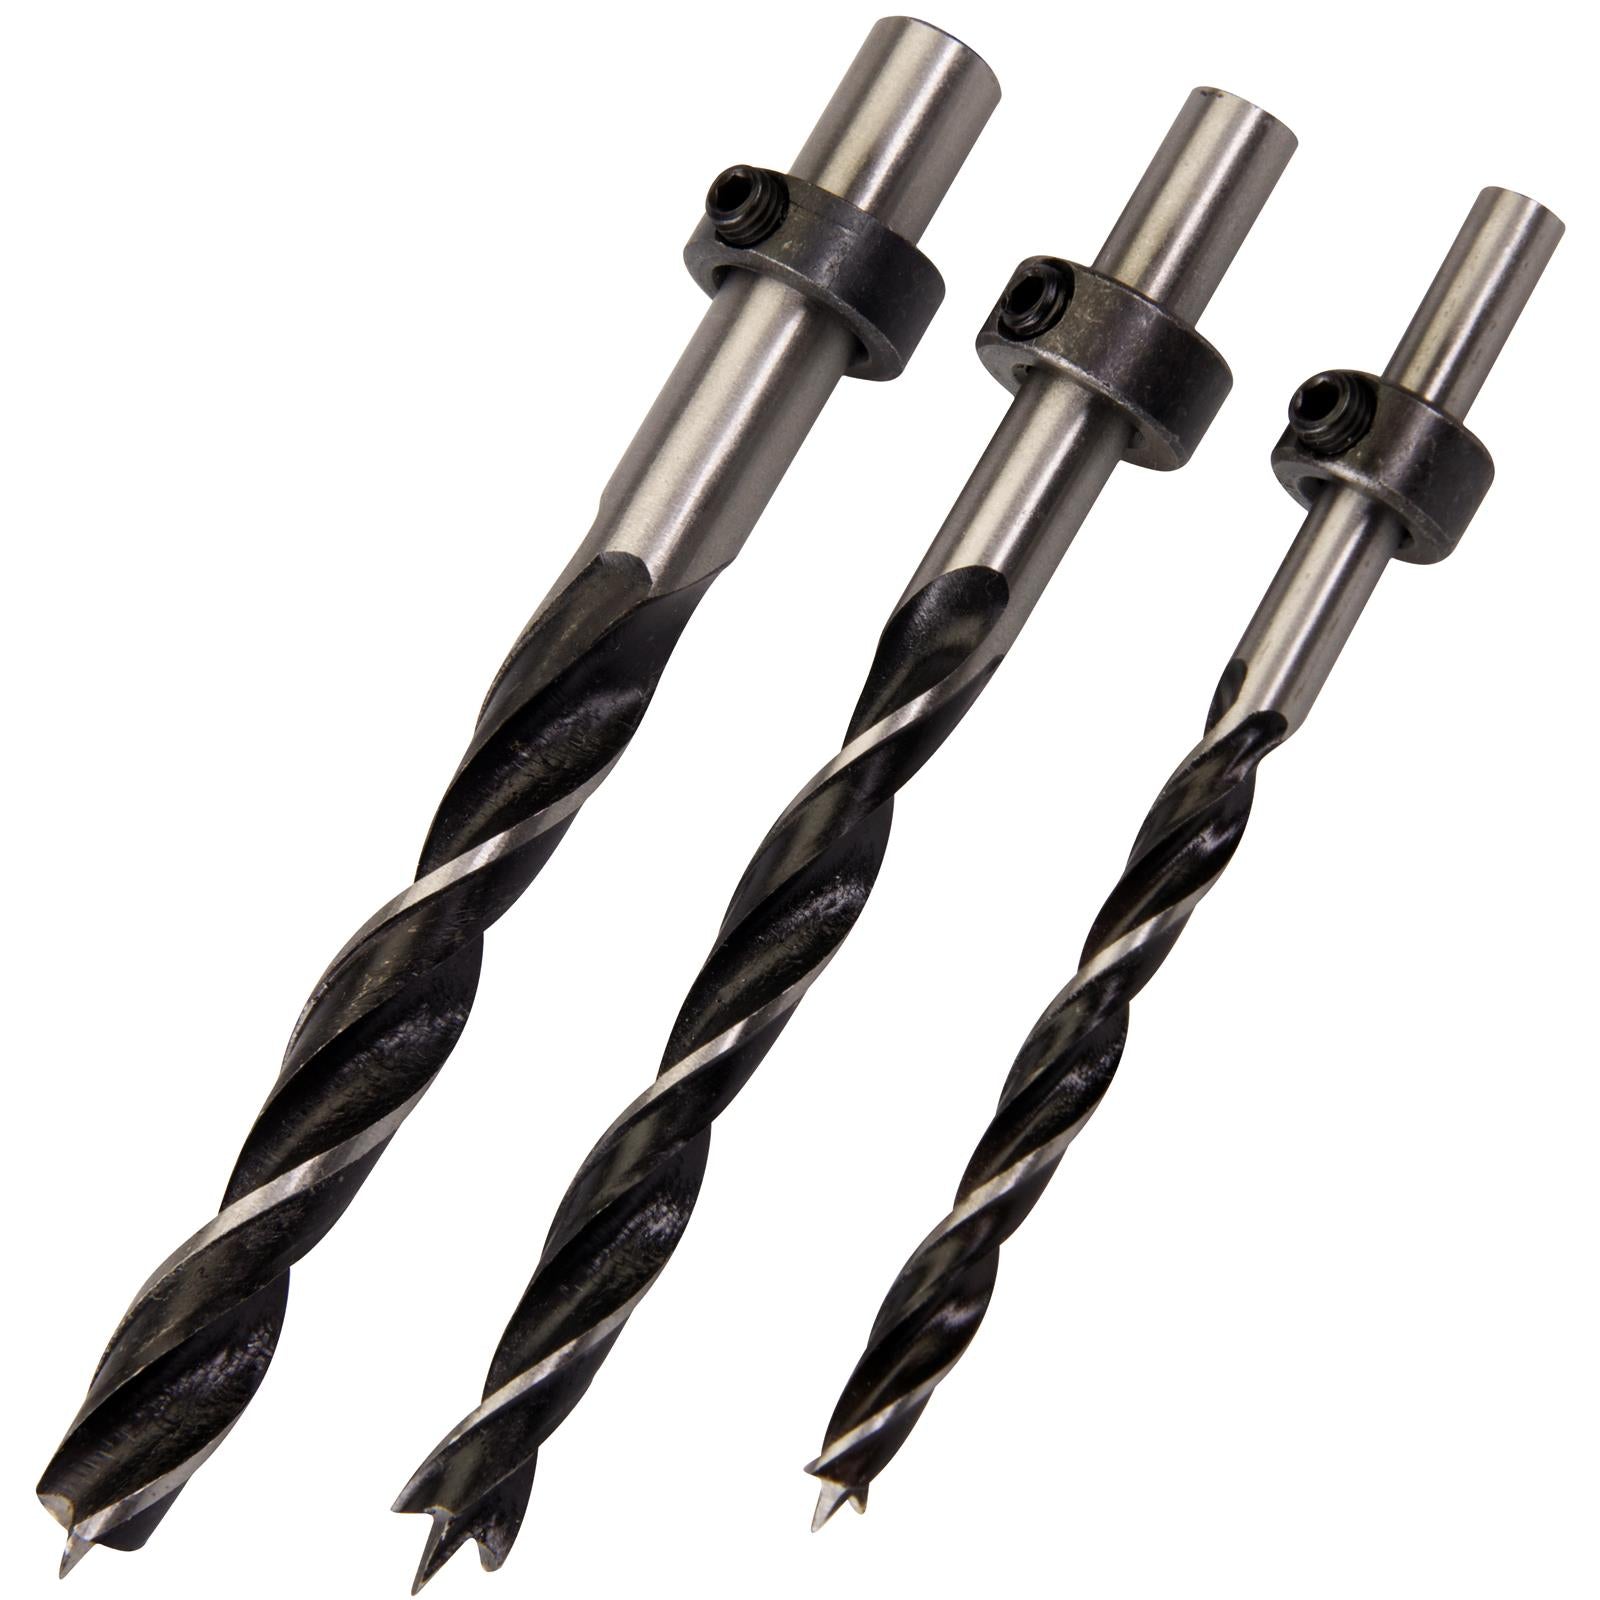 Silverline 3 Piece Dowel Drill Set 6, 8 & 10mm Wood Timber Joinery Lip Spur